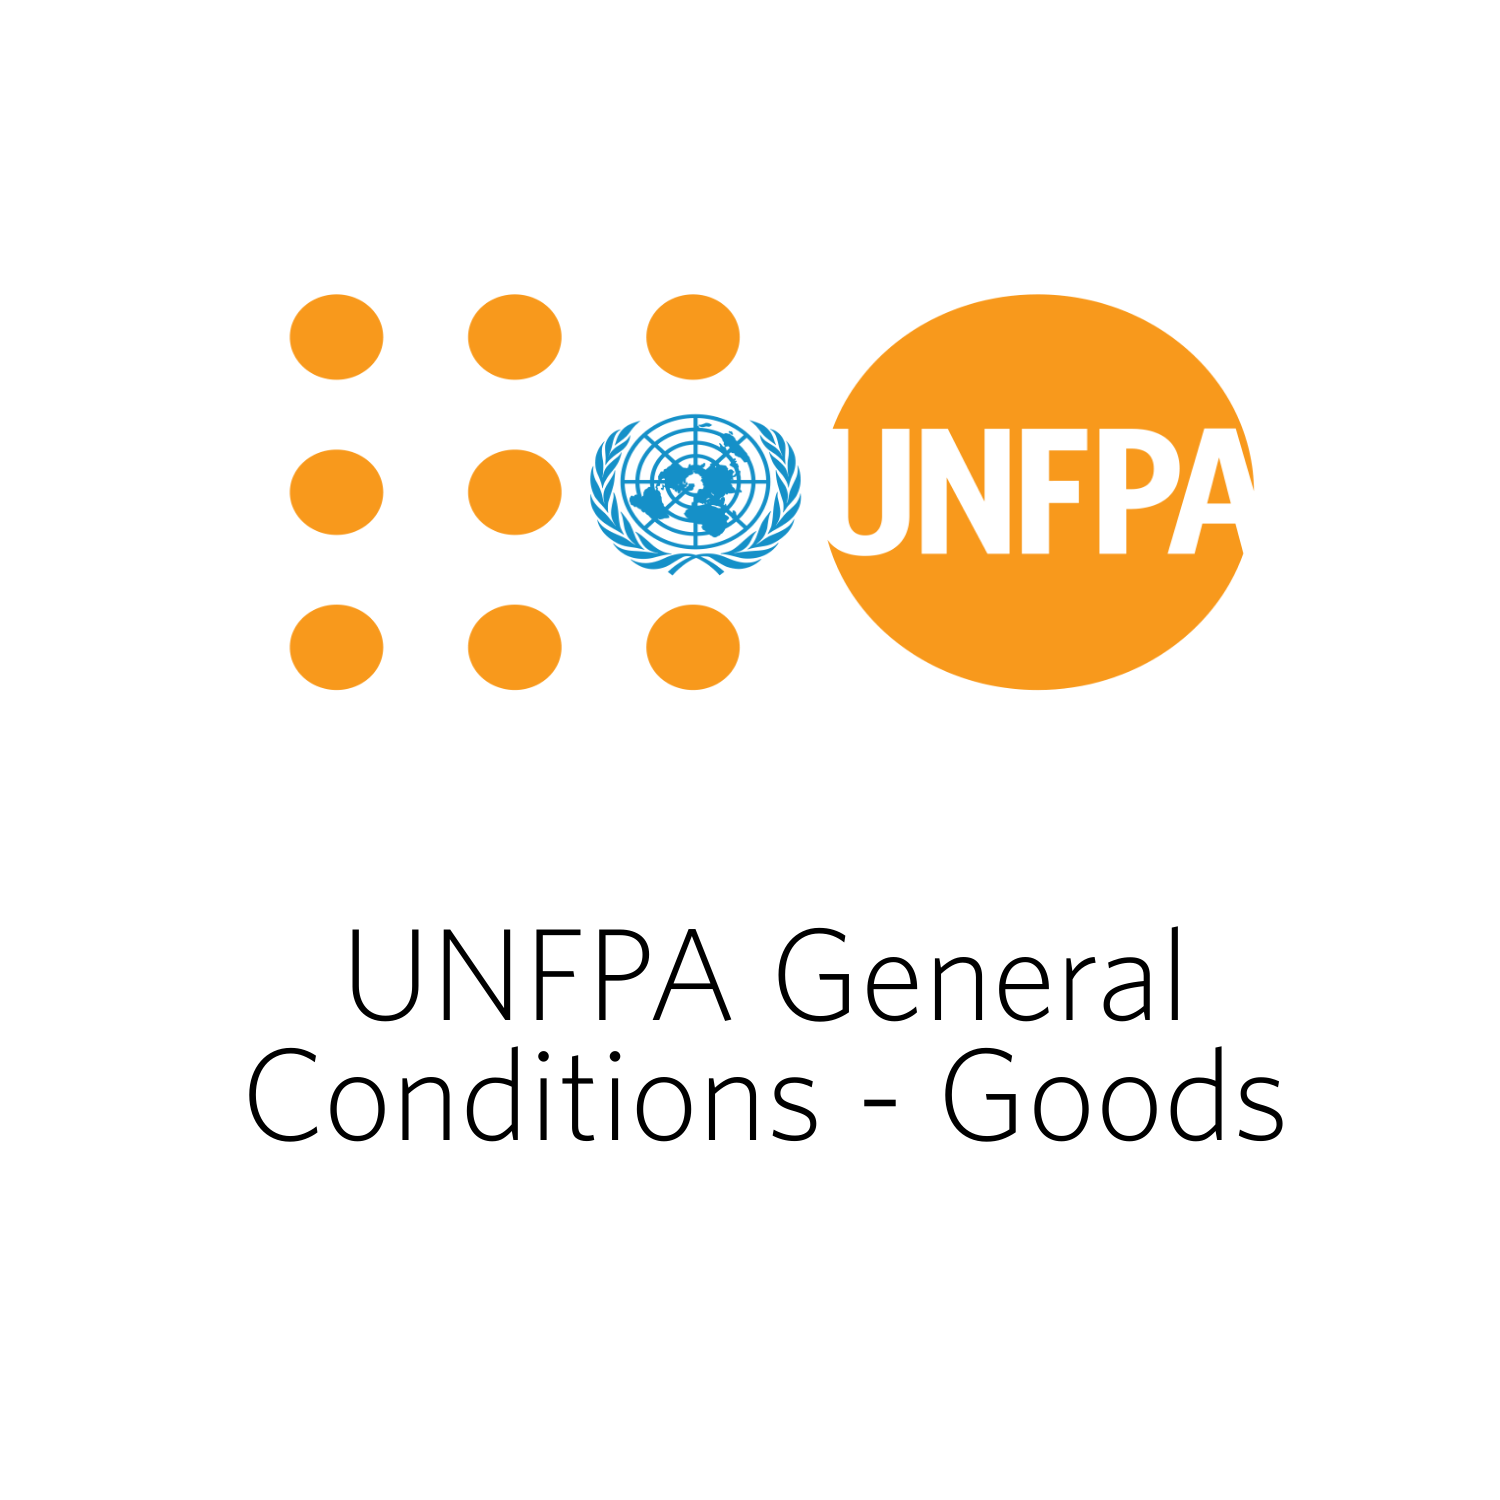 UNFPA General Conditions - Goods